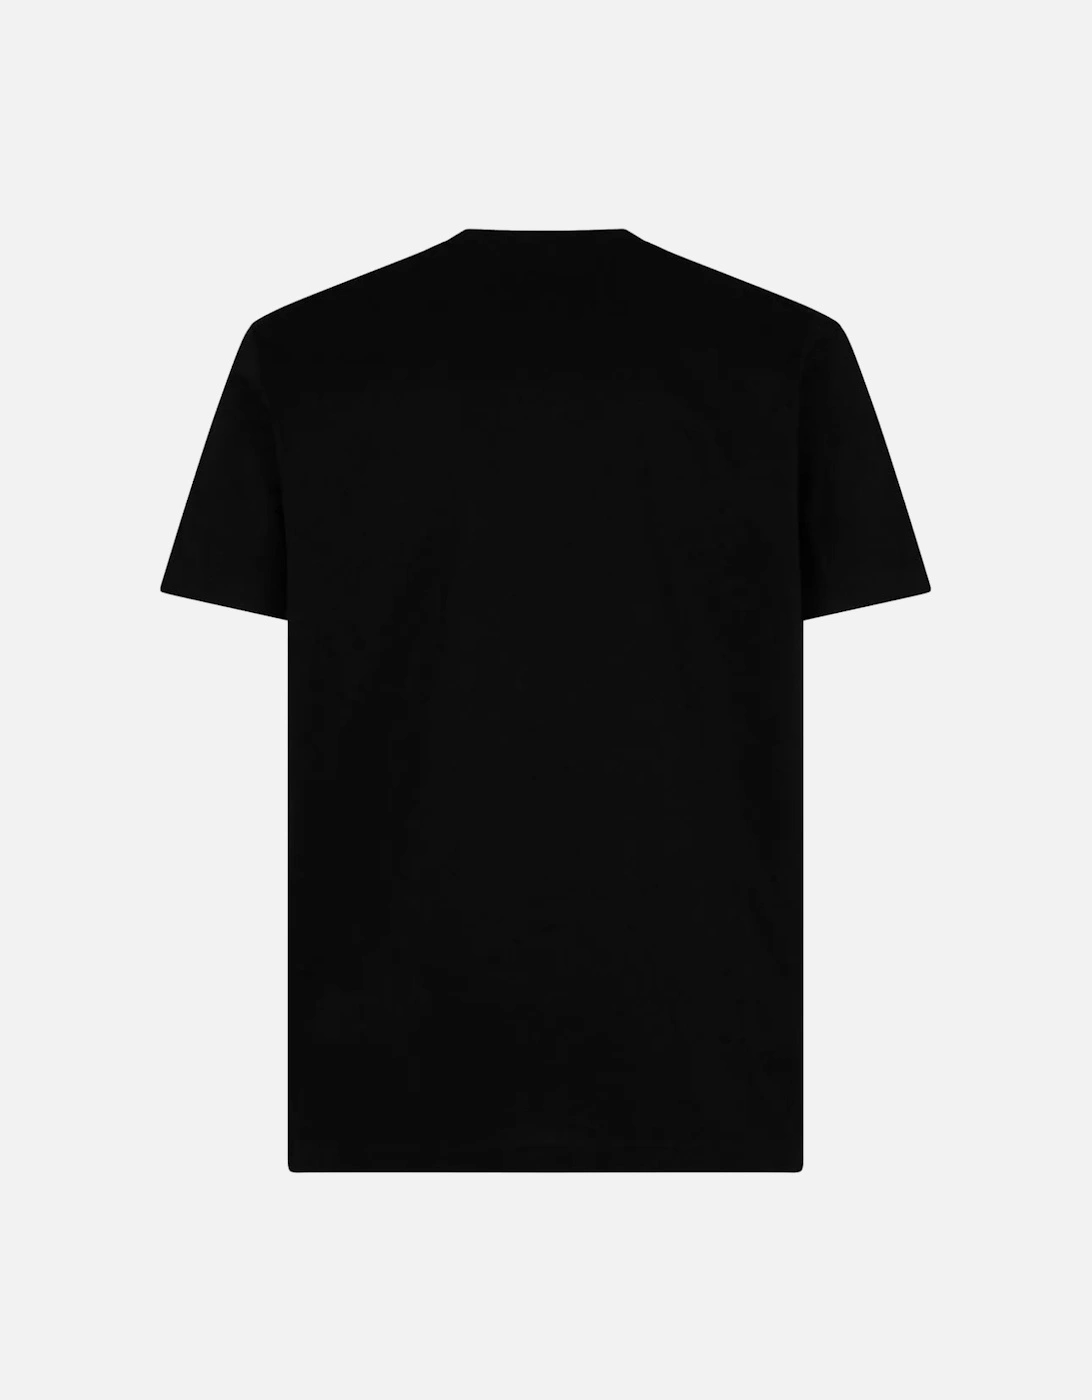 Curved Icon print T-Shirt in Black